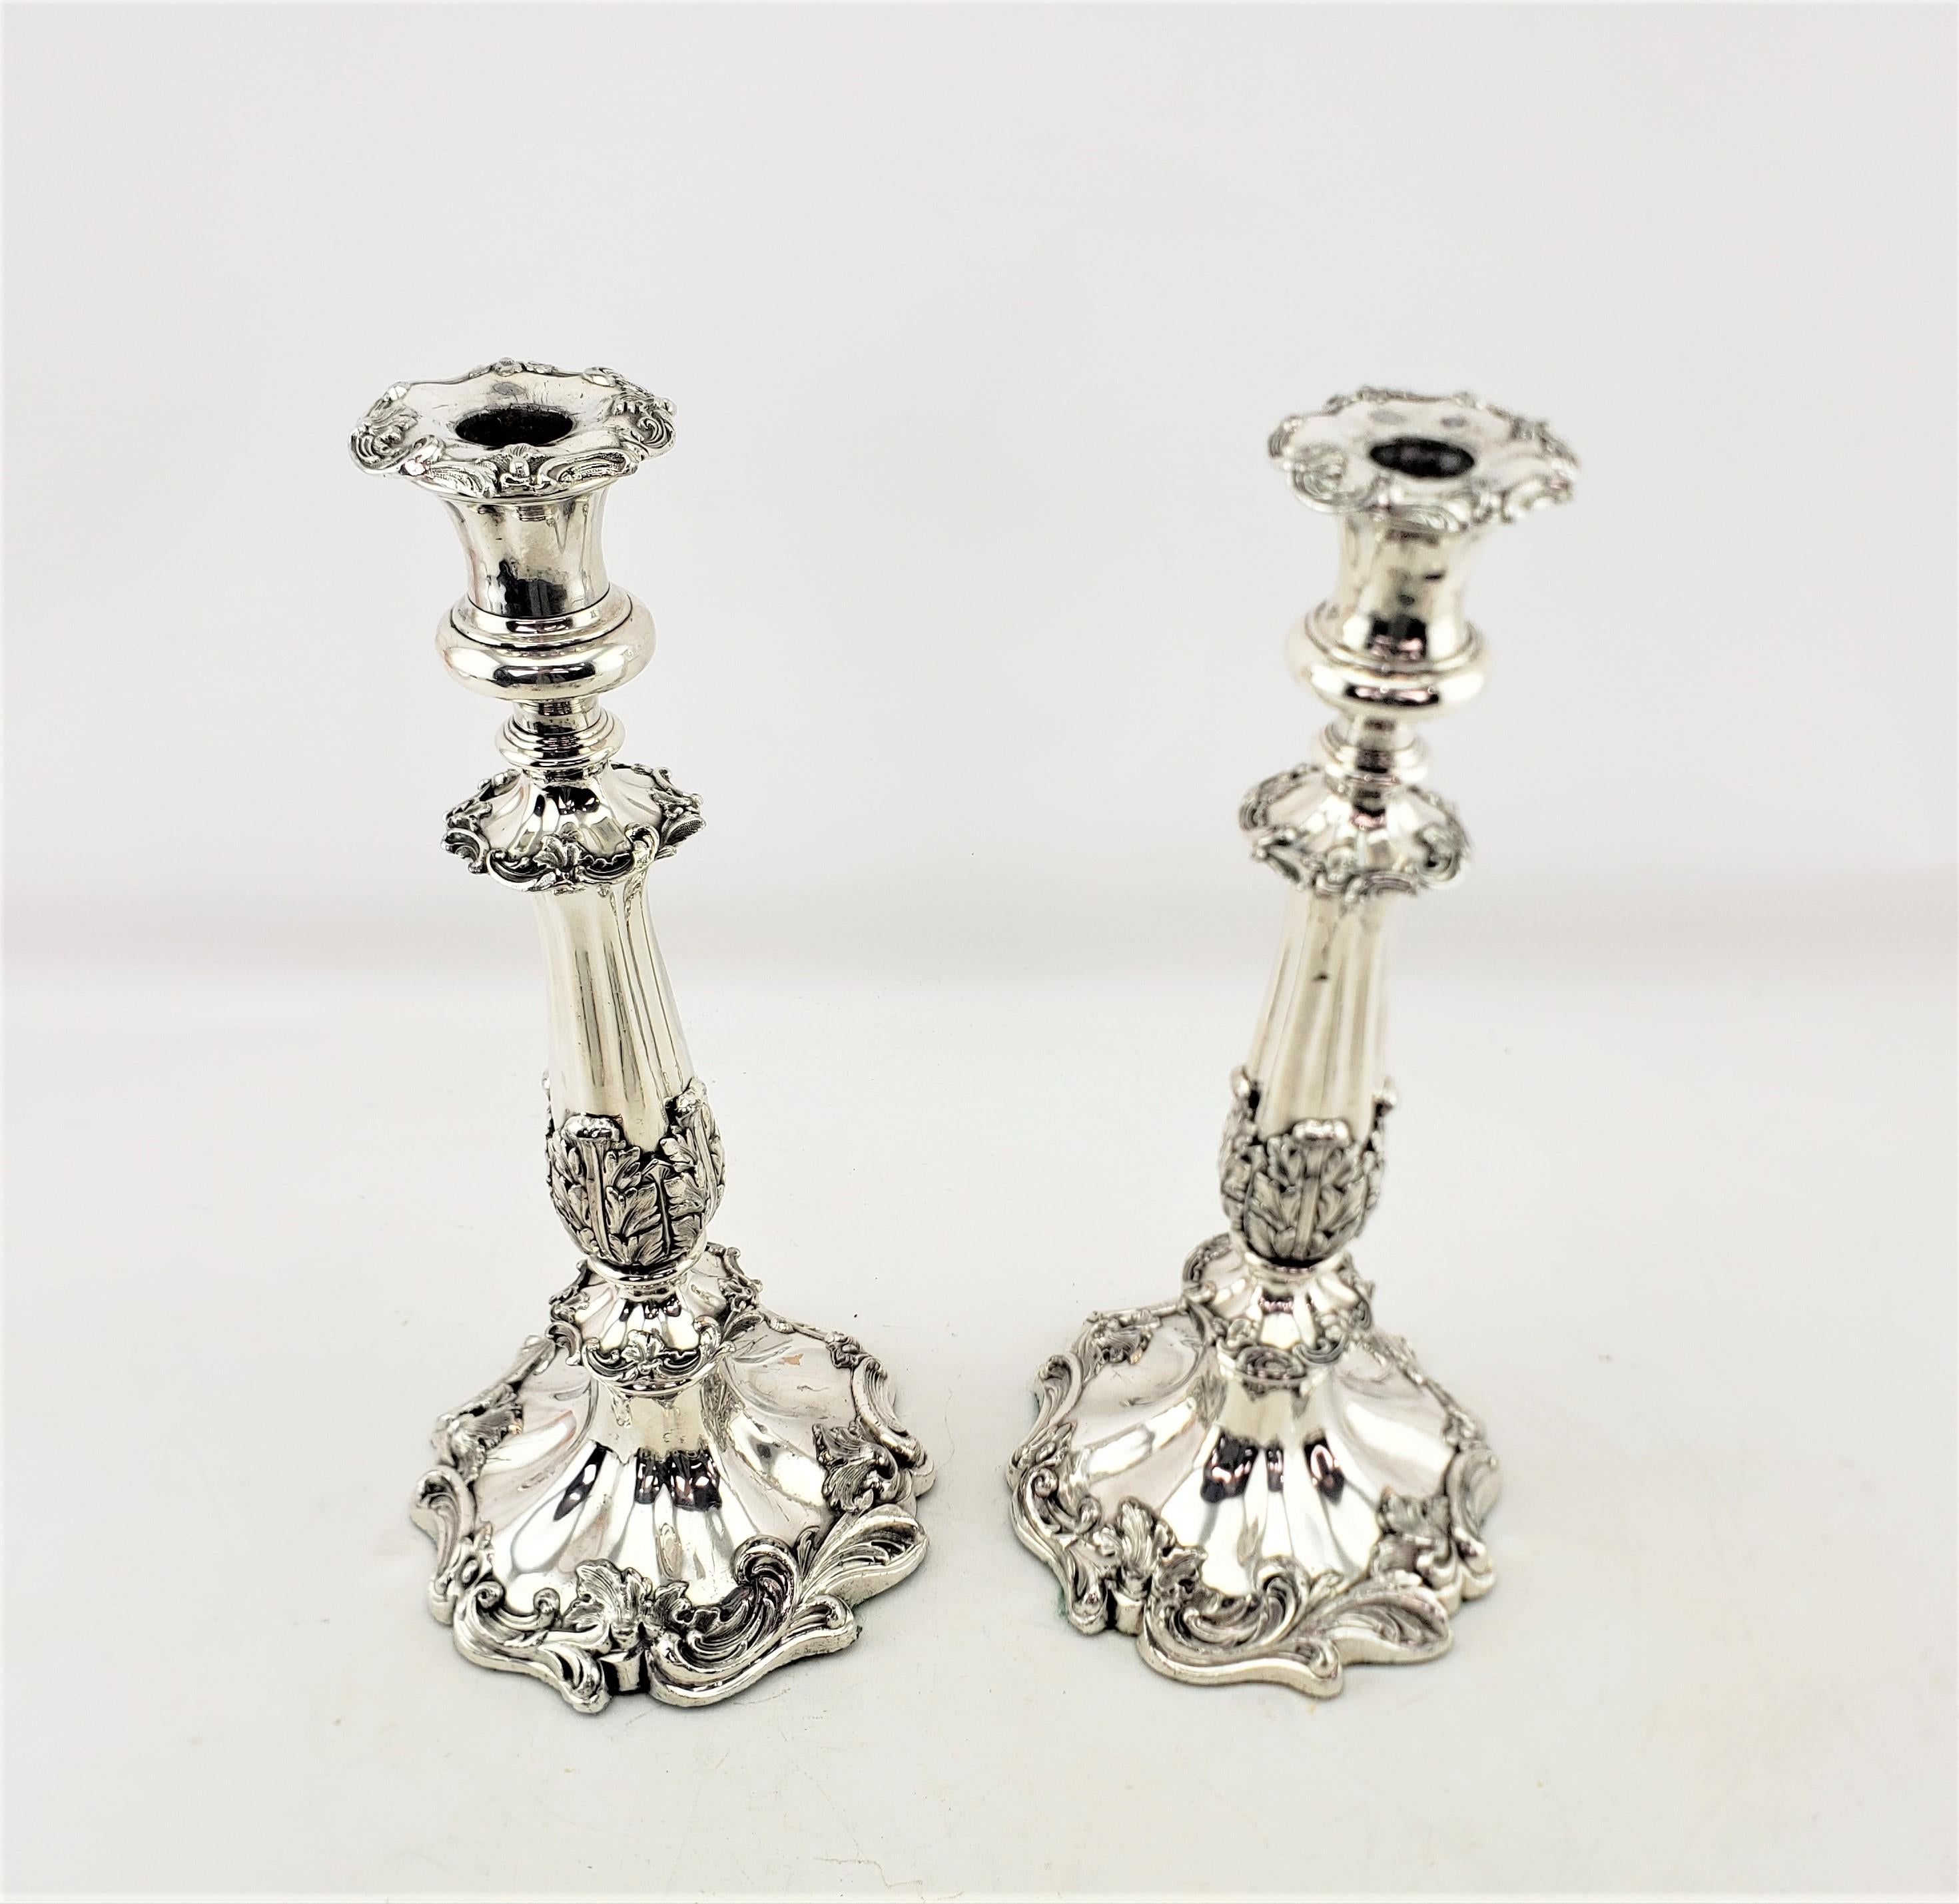 Antique Silver Plated Convertible Candelabras or Candlesticks with Leaf Decor For Sale 1